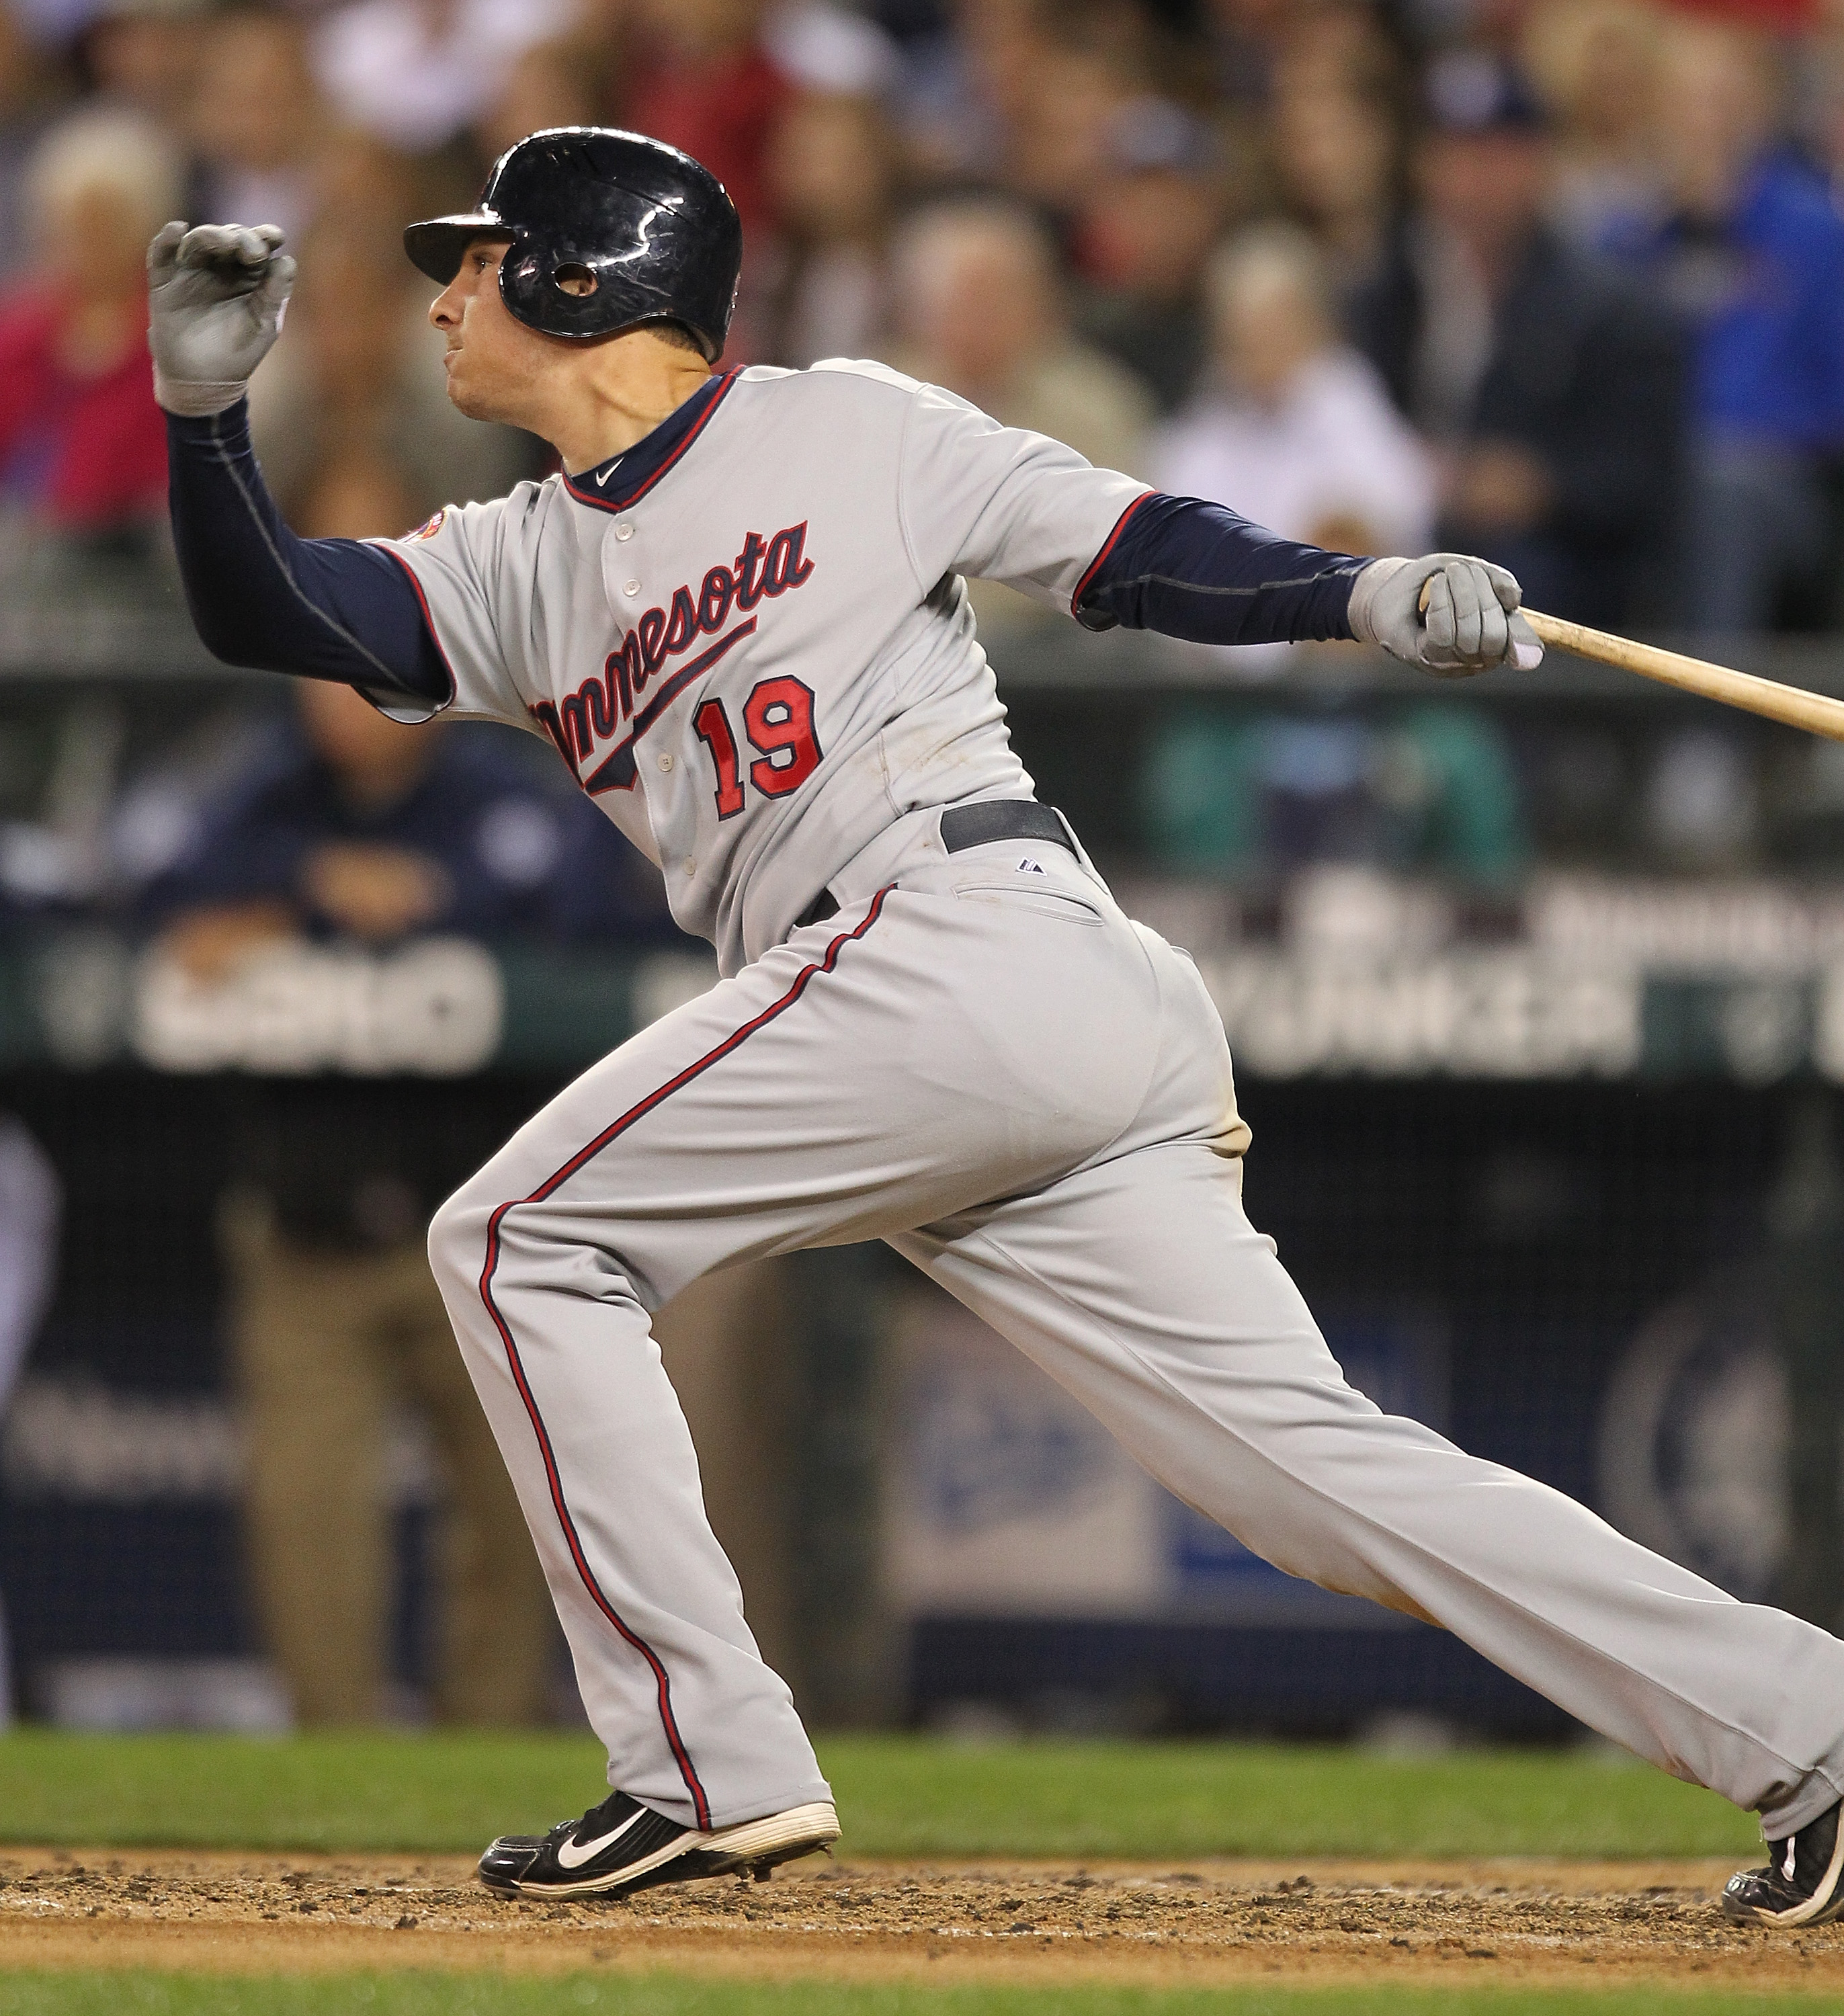 SEATTLE - AUGUST 27:  Danny Valencia #19 of the Minnesota Twins hits a two RBI triple against the Seattle Mariners at Safeco Field on August 27, 2010 in Seattle, Washington. (Photo by Otto Greule Jr/Getty Images)